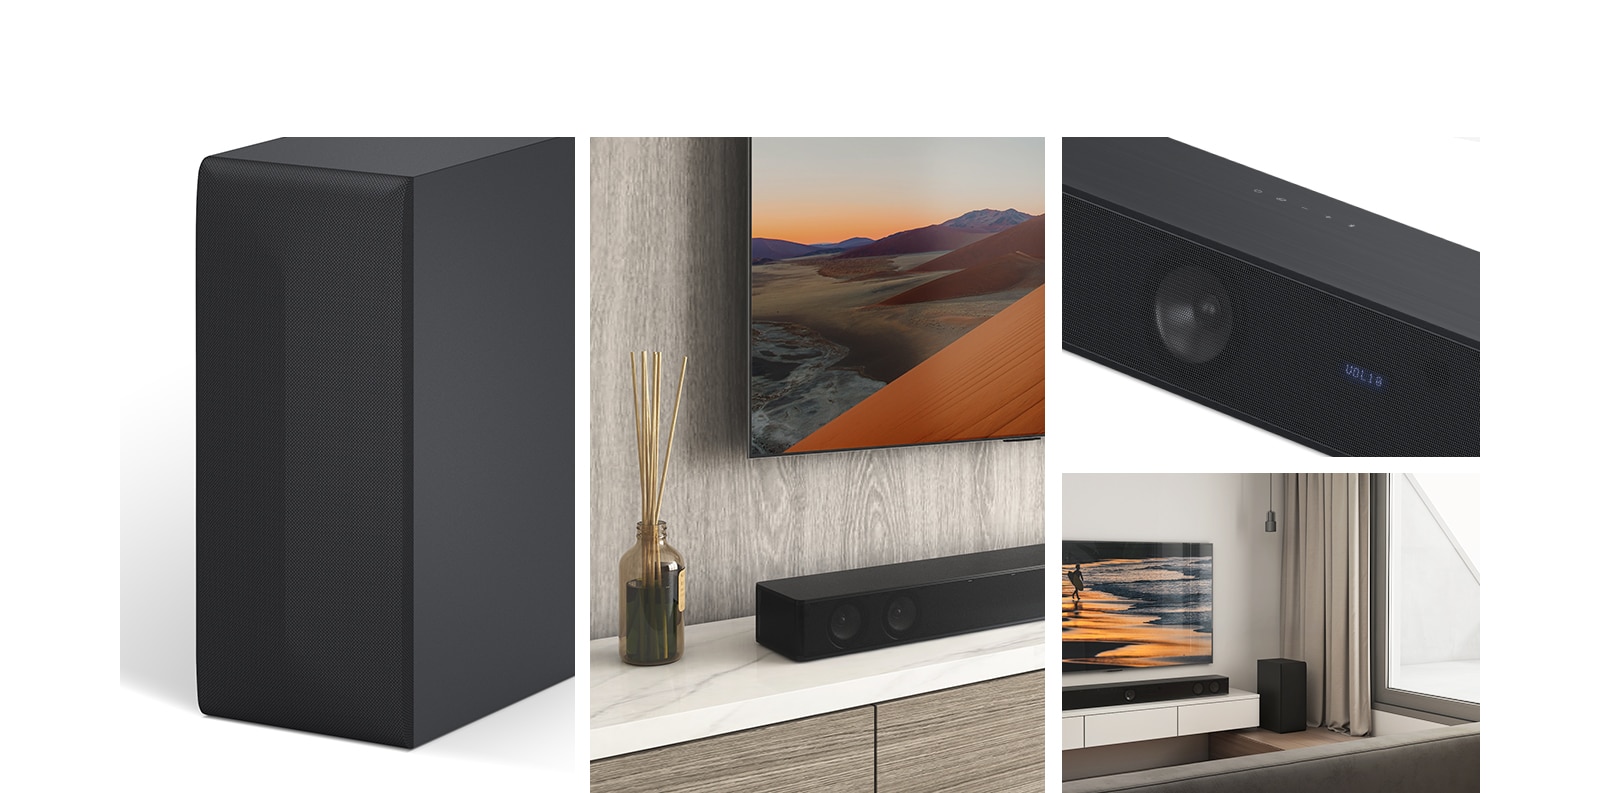 From left, an image of sub woofer, Close up of LG TV, showing the mountain on the screen and LG Sound Bar below. On the right, from top-bottom: close-up of LG Sound Bar. LG TV, showing a beach at sunset, and LG Sound Bar, sub woofer is placed in the living room.